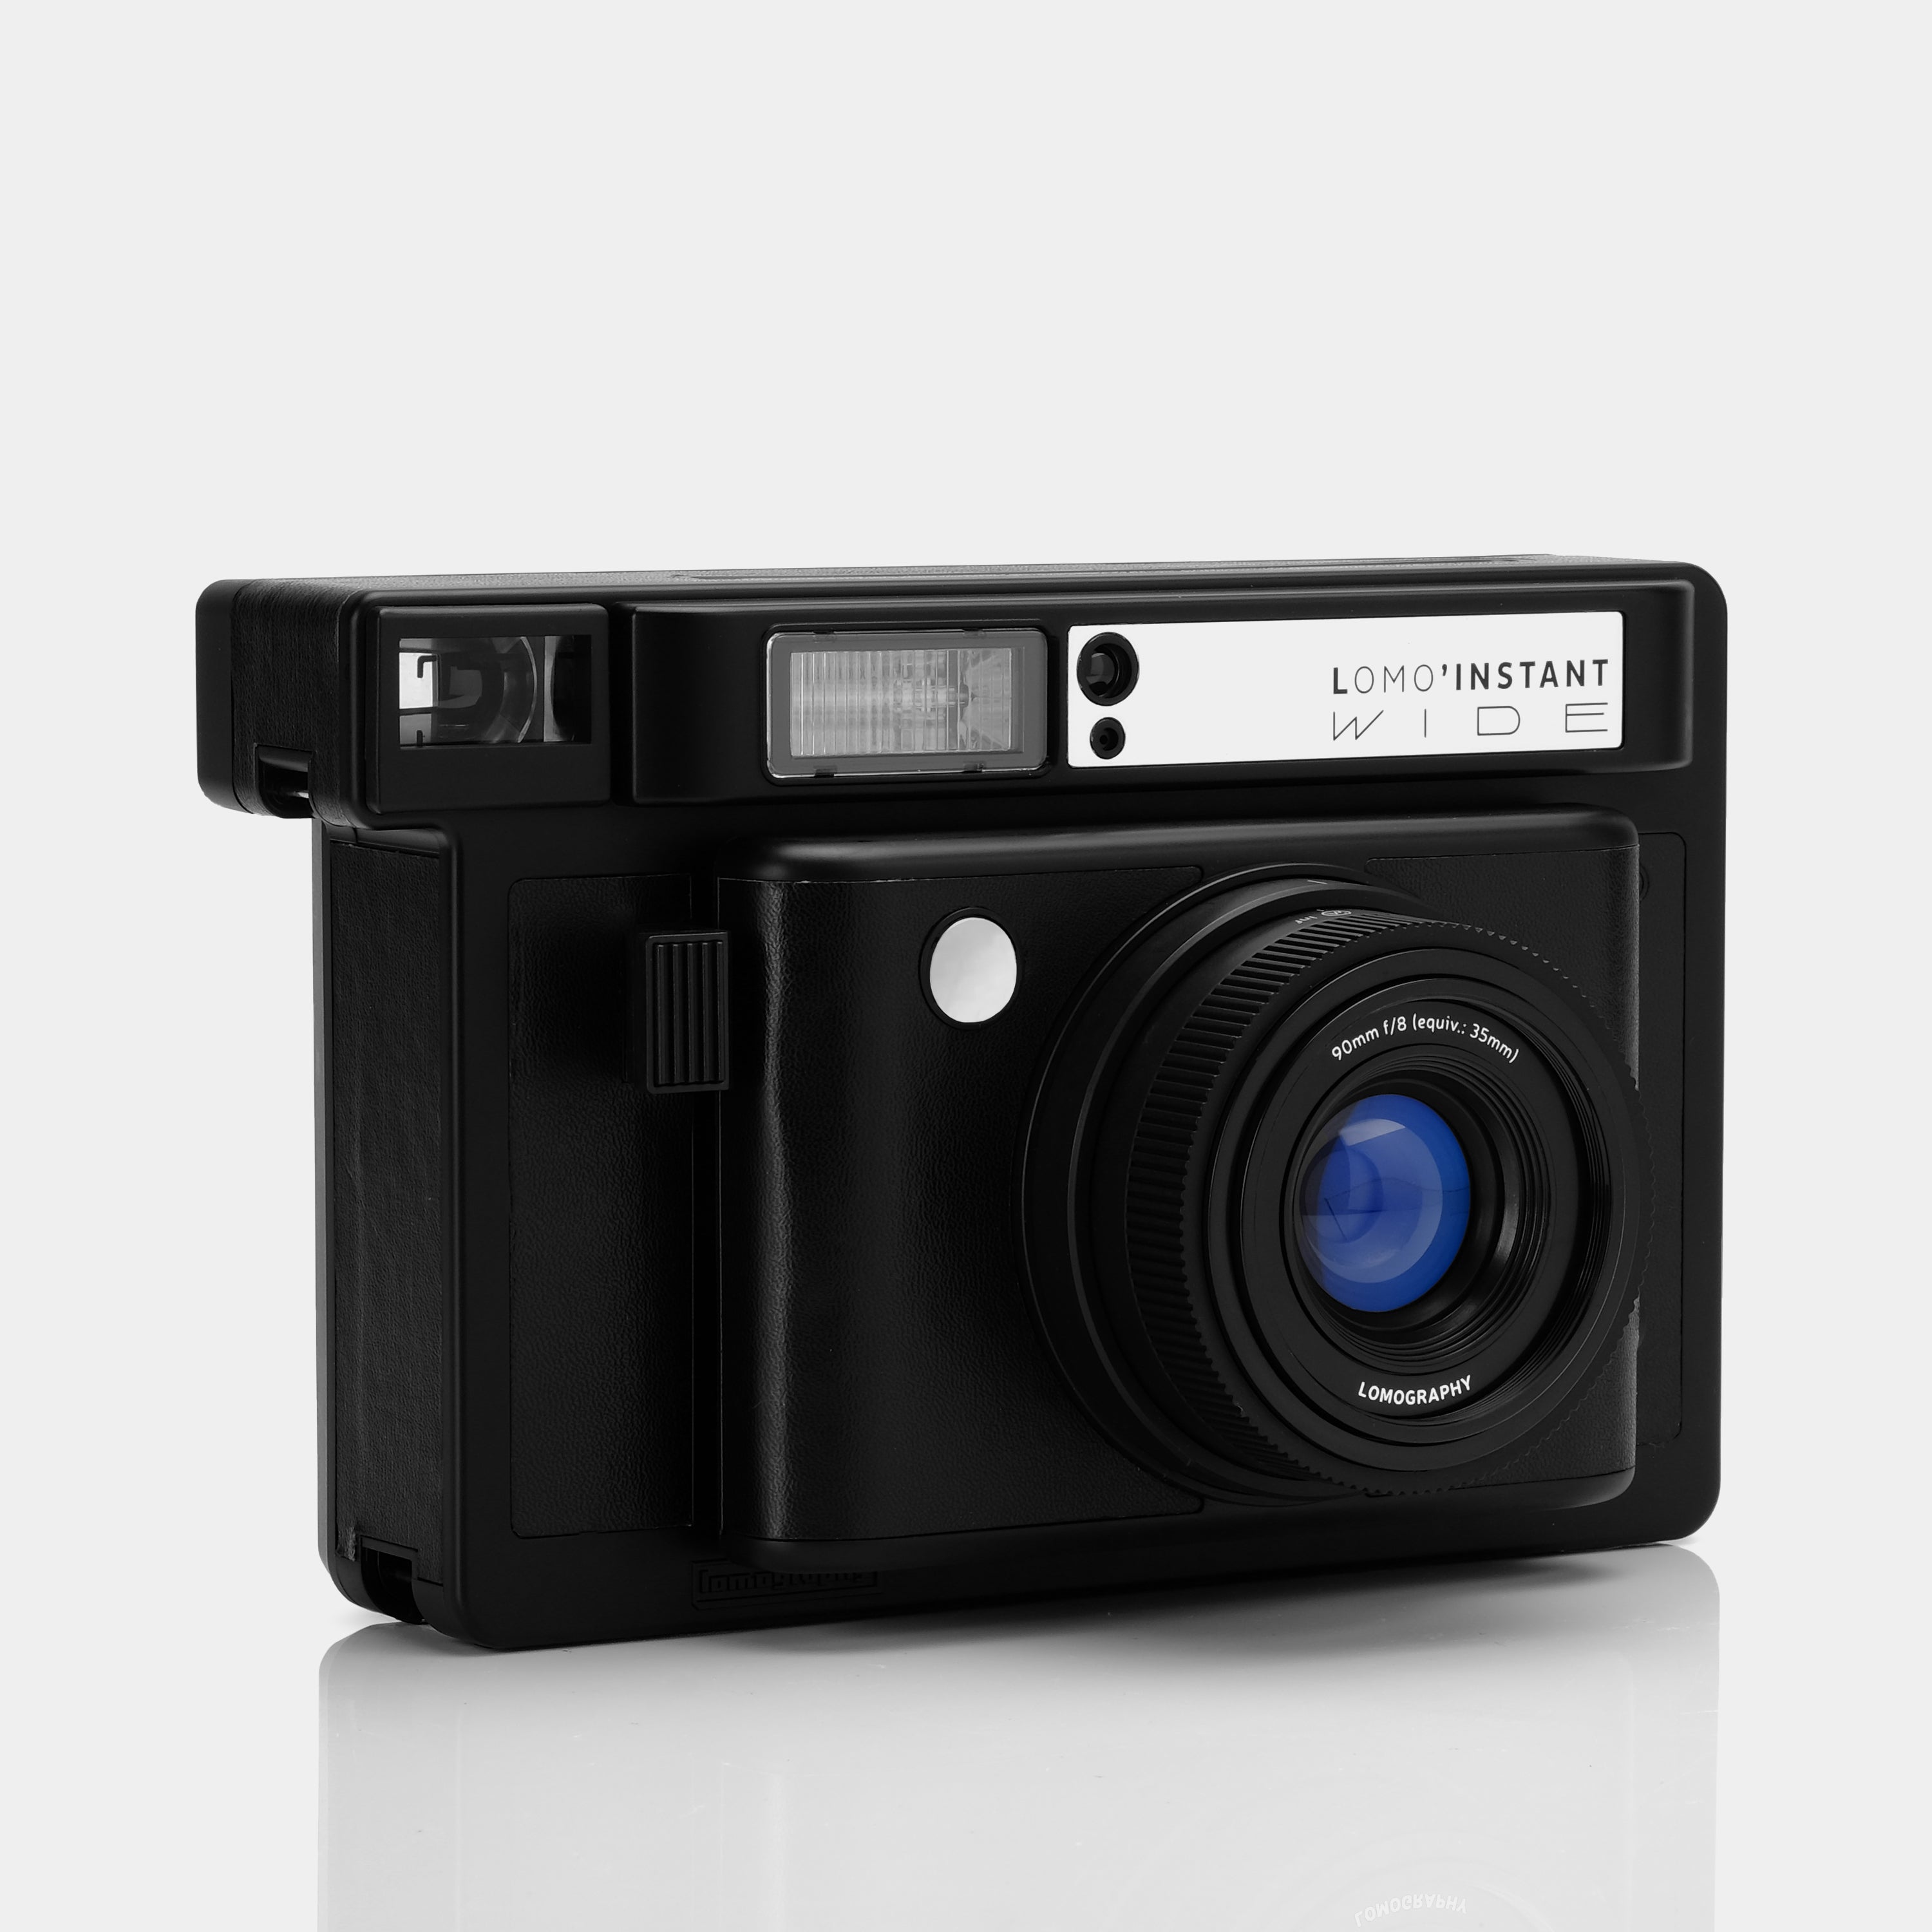 Lomography Lomo'Instant Wide Instax Instant Film Camera and Lenses Combo (Black Edition)